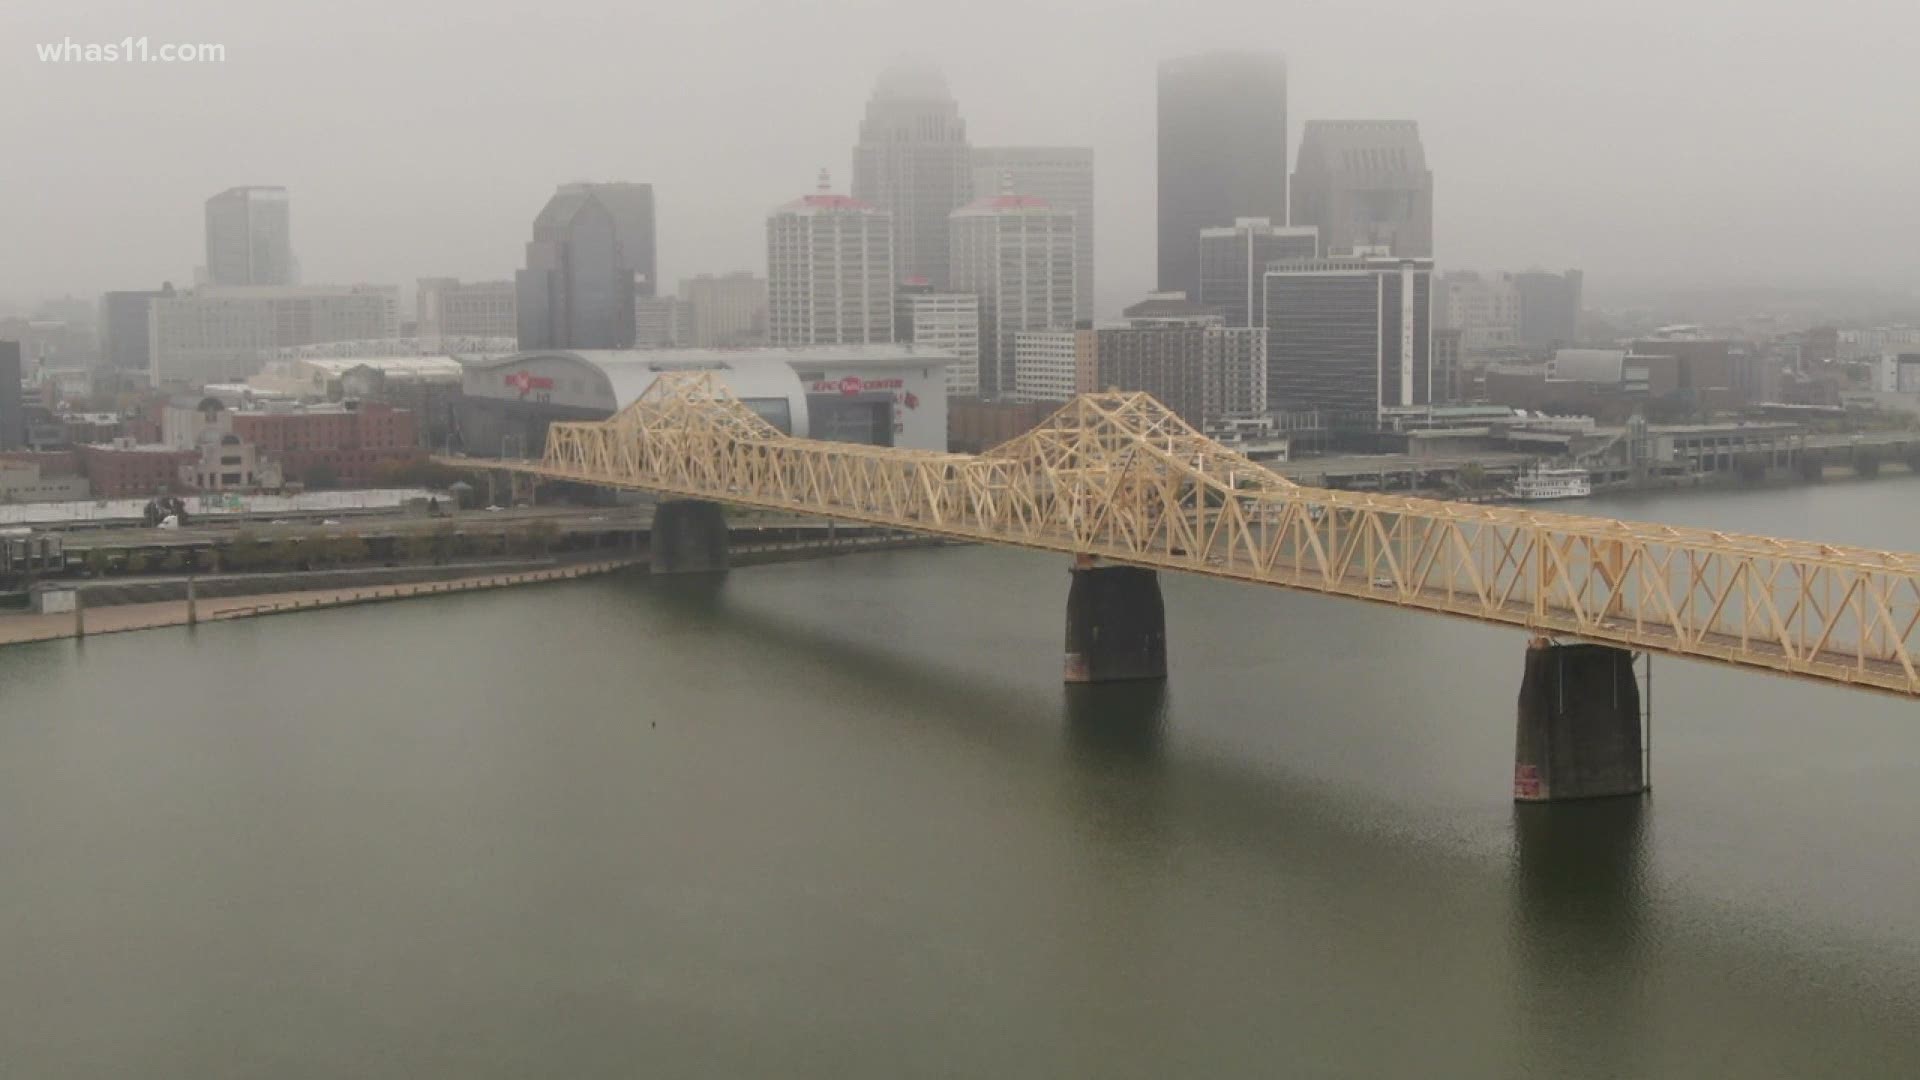 Every year, dozens of Louisvillians jump from the city's bridges in an attempt to commit suicide. We're taking a closer look at the city's mental health crisis.